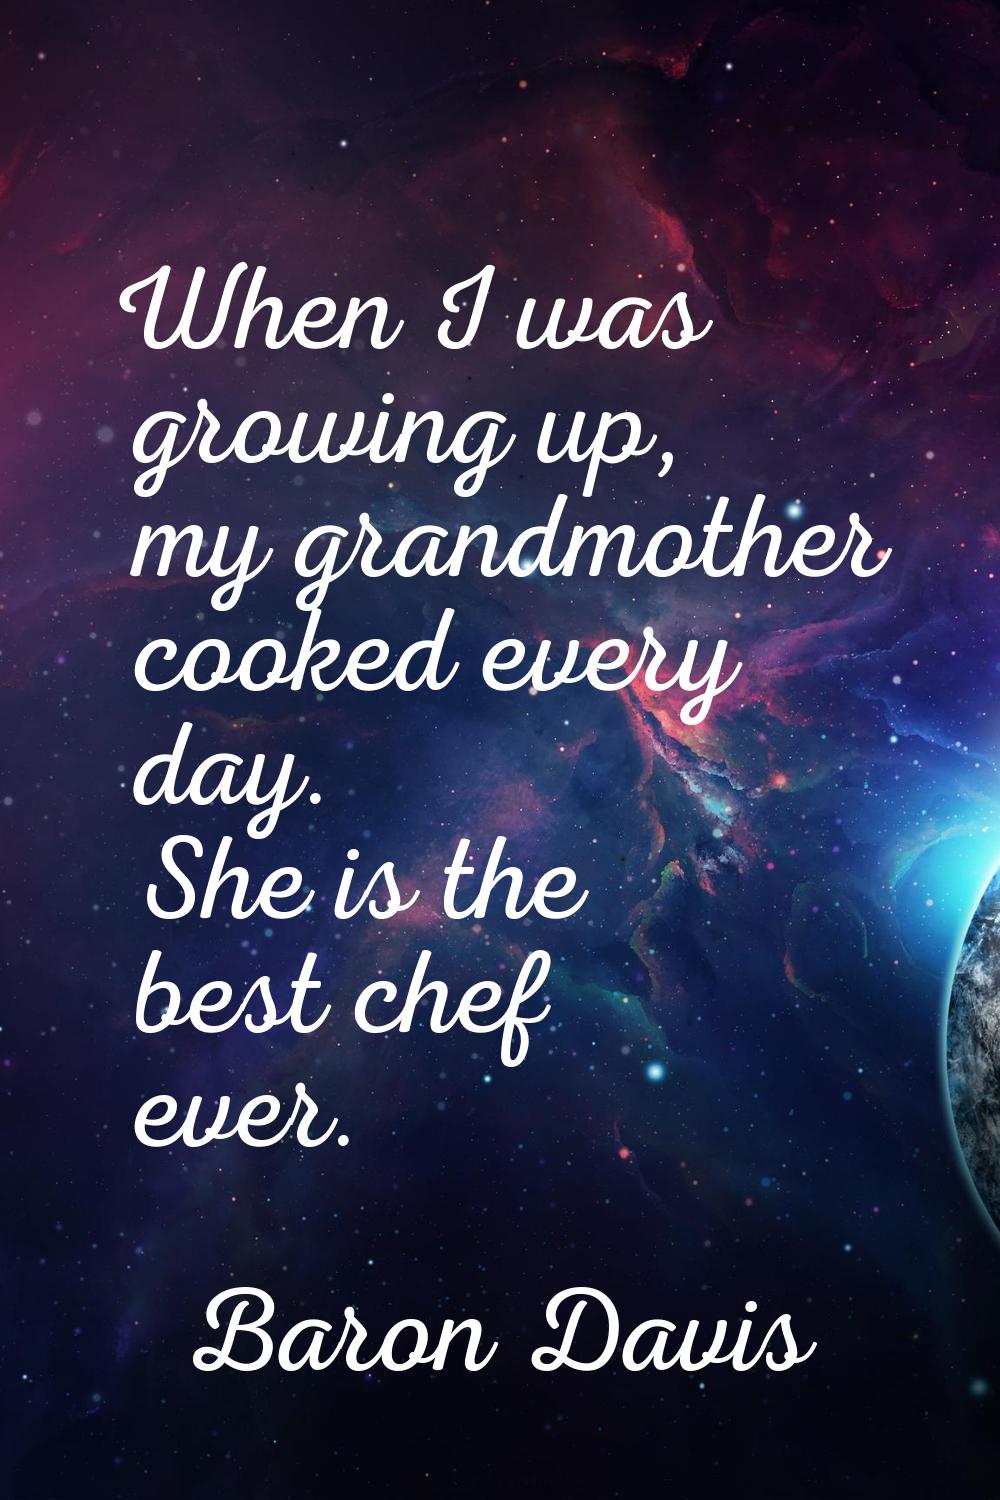 When I was growing up, my grandmother cooked every day. She is the best chef ever.